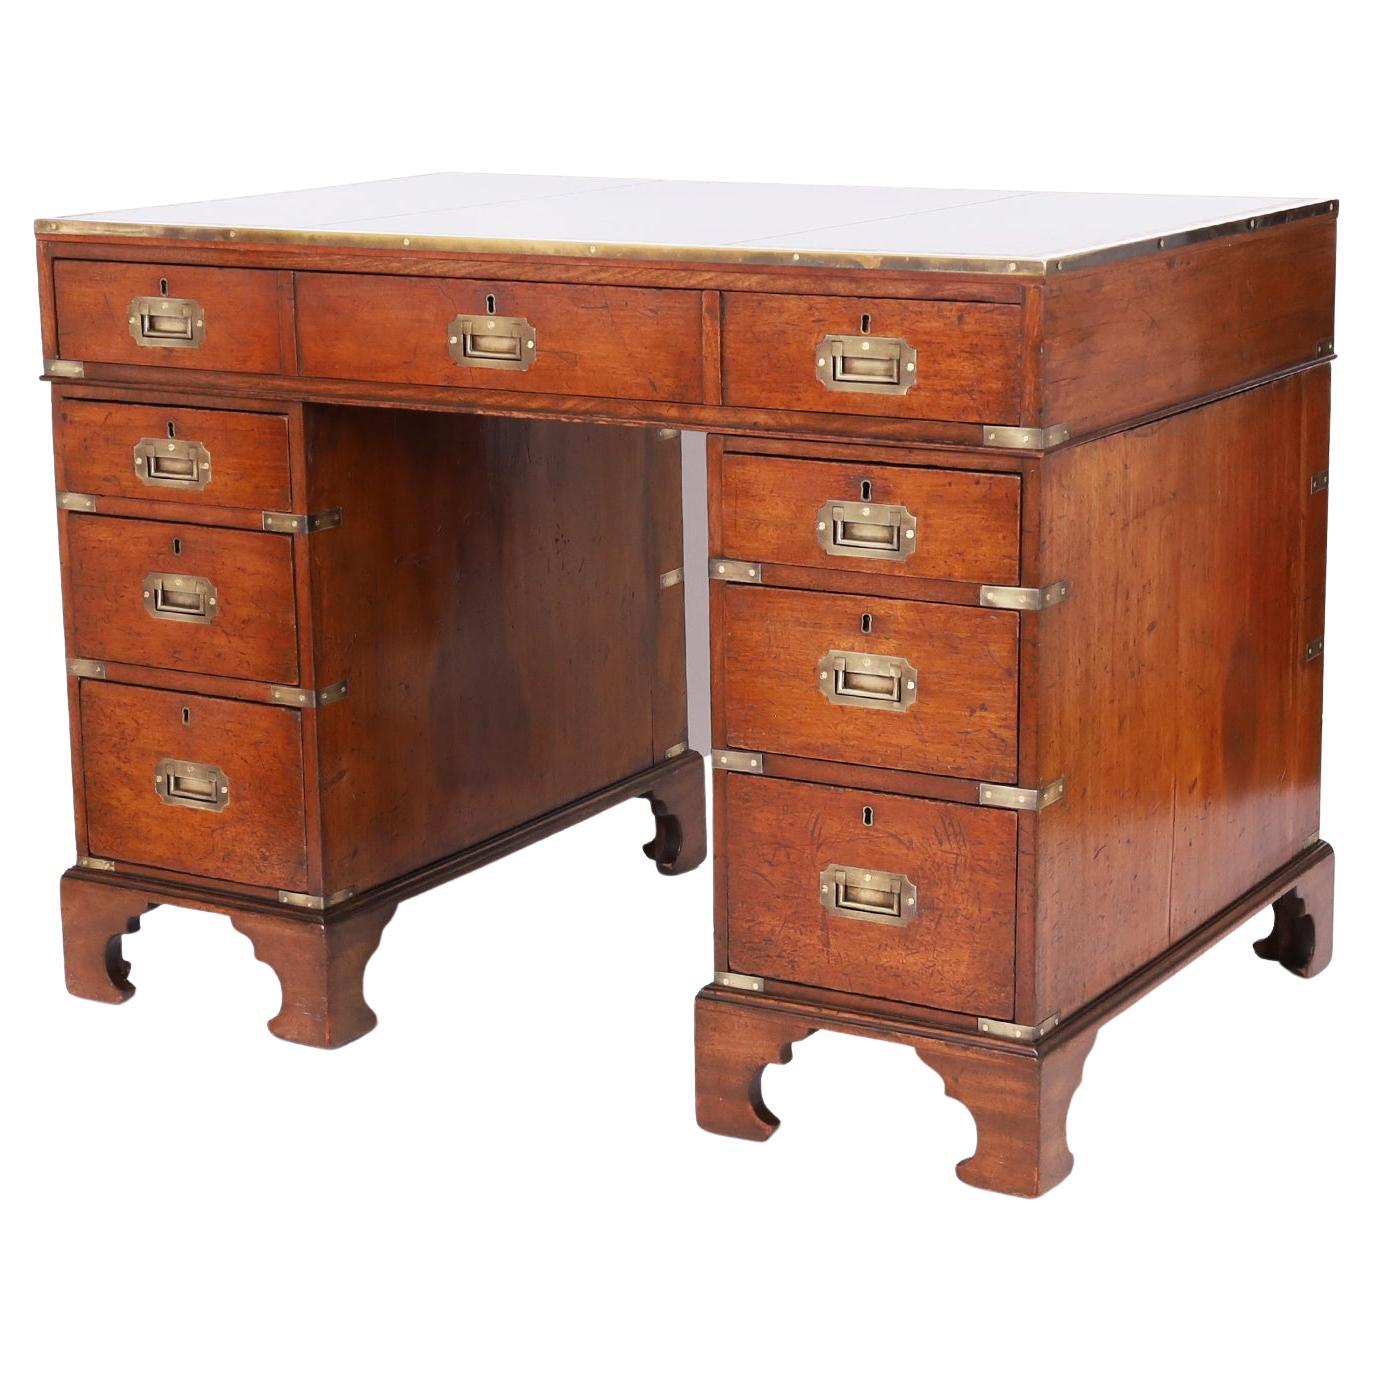 English Campaign Leather Top Desk